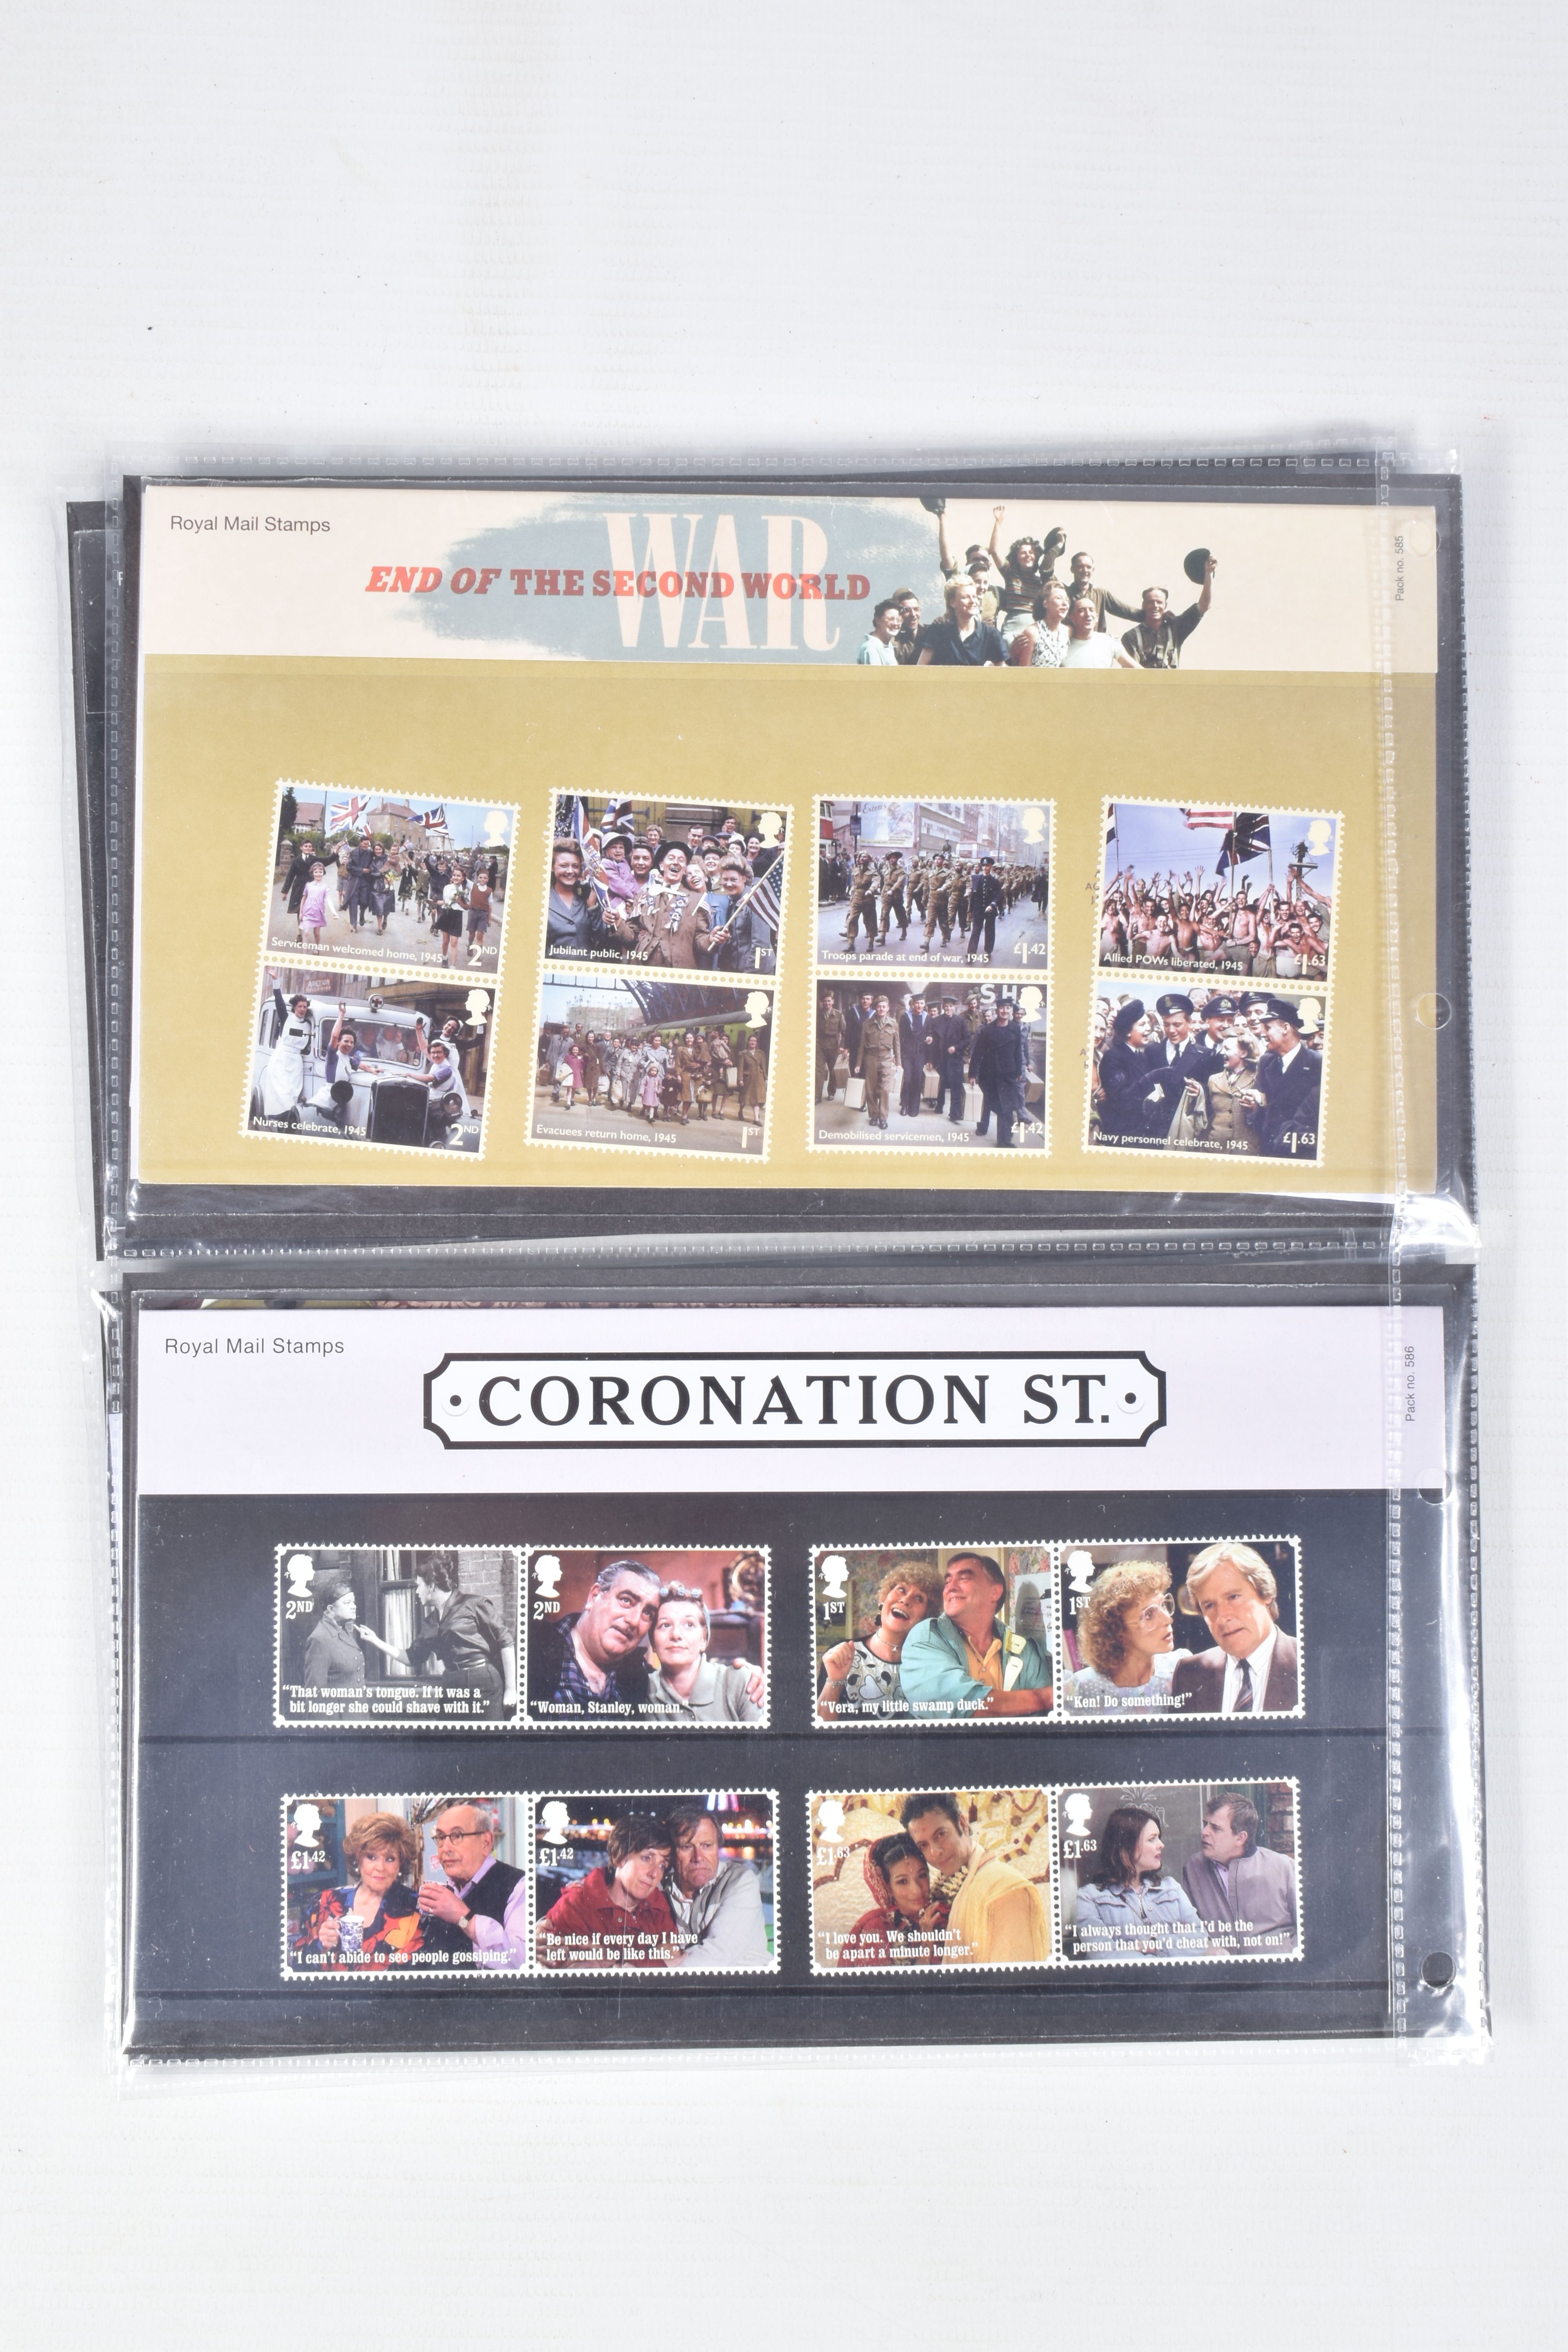 LARGE COLLECTION OF GB PRESENTATION PACKS FROM 2008-2020, NOT GUARANTEED COMPLETE BUT LOOKS NEARLY - Image 12 of 70